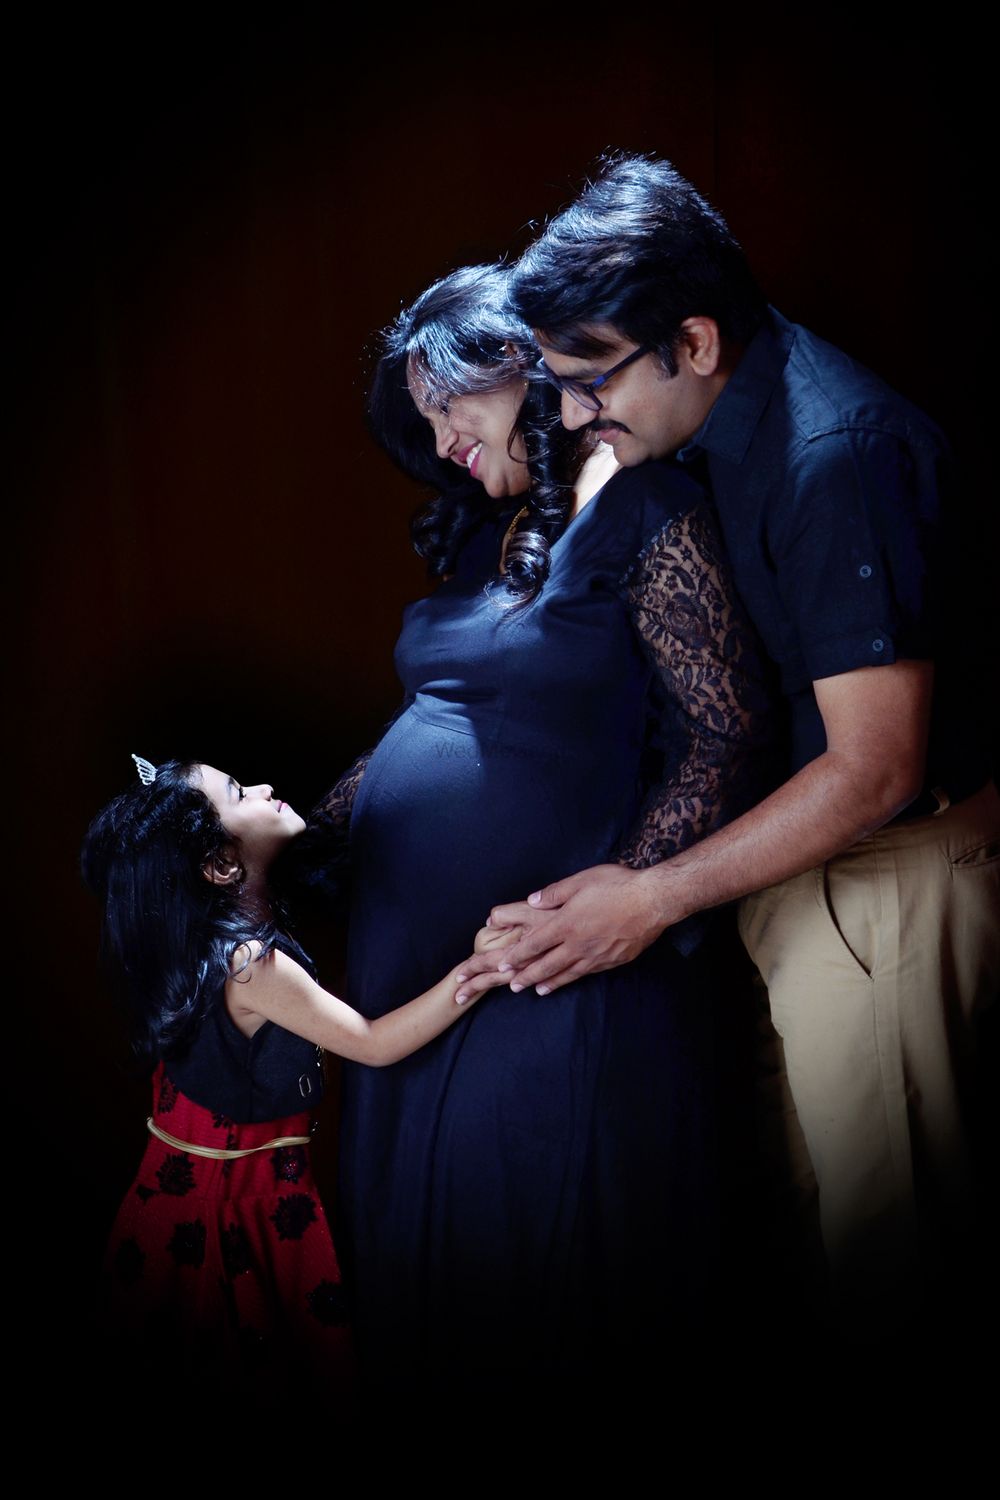 Photo From Mom to be.... celebrating the arrival of little one - By Katti's Dream Clicks